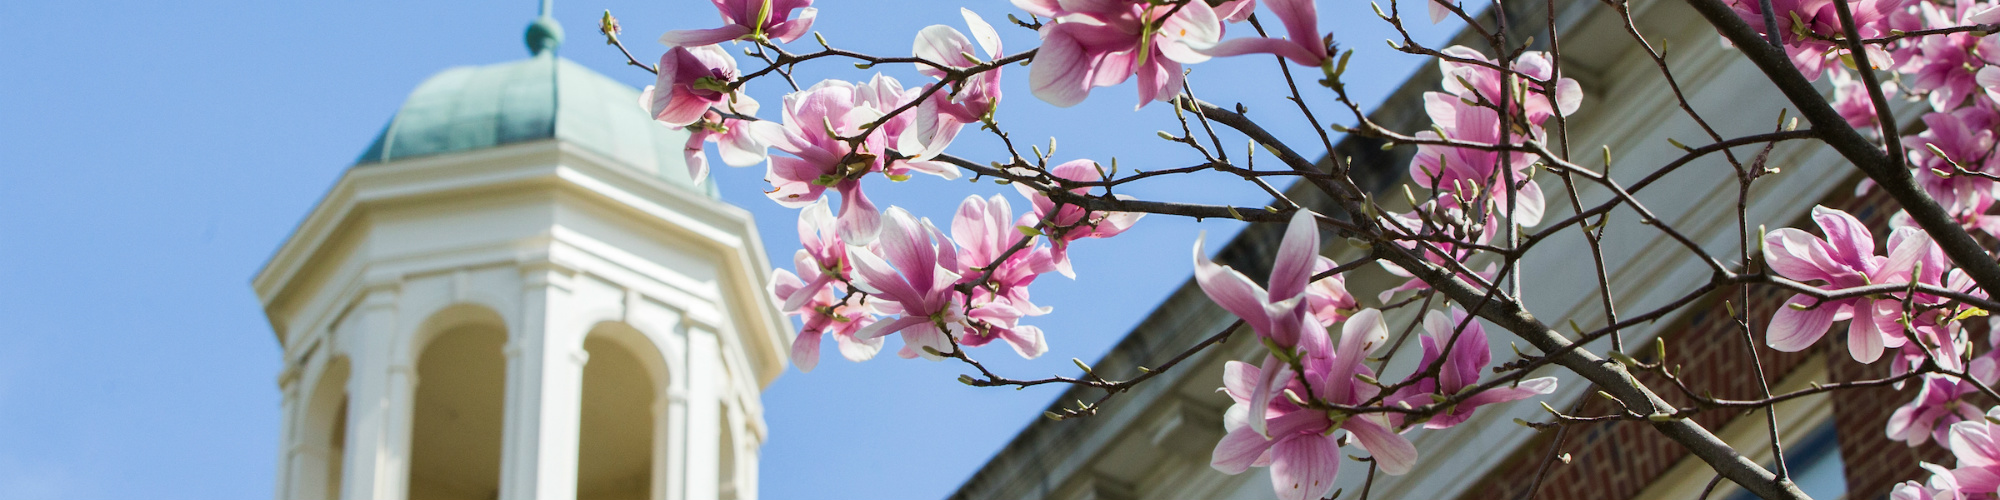 Pink flowers on tree branch in front of cupola of building